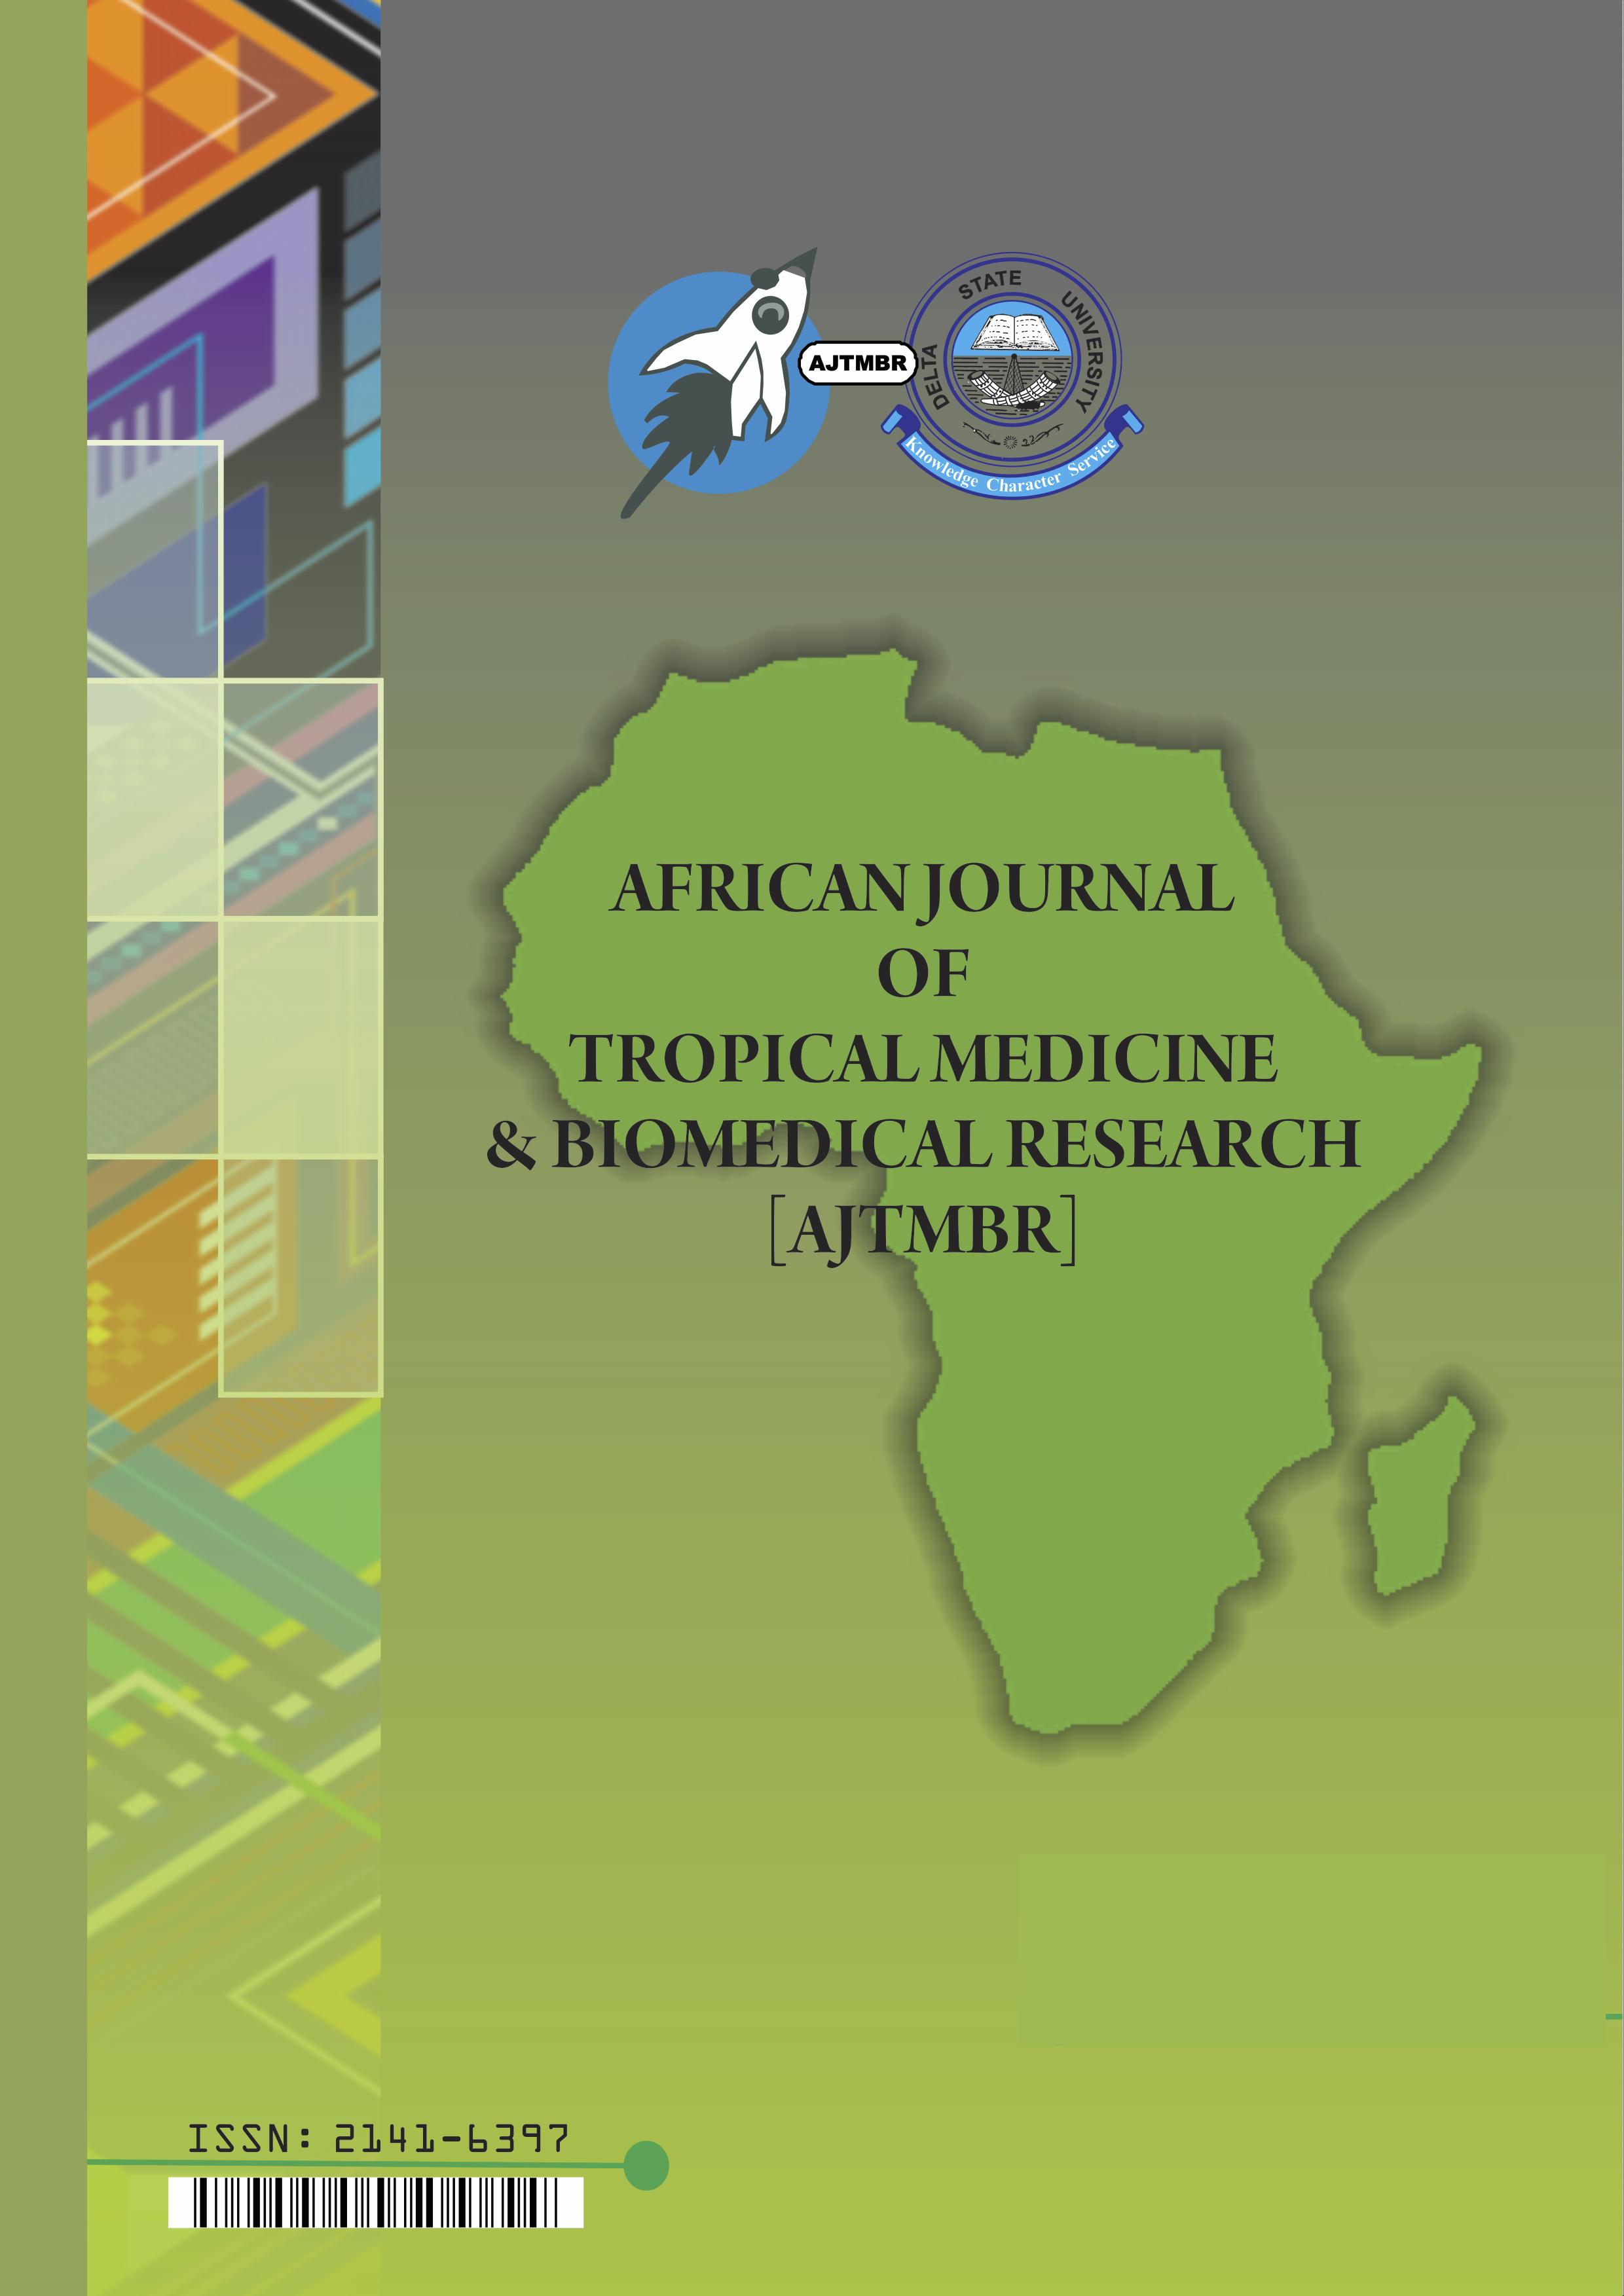 					View Vol. 2 No. 2: African Journal of Tropical Medicine and Biomedical Research; September 2015
				